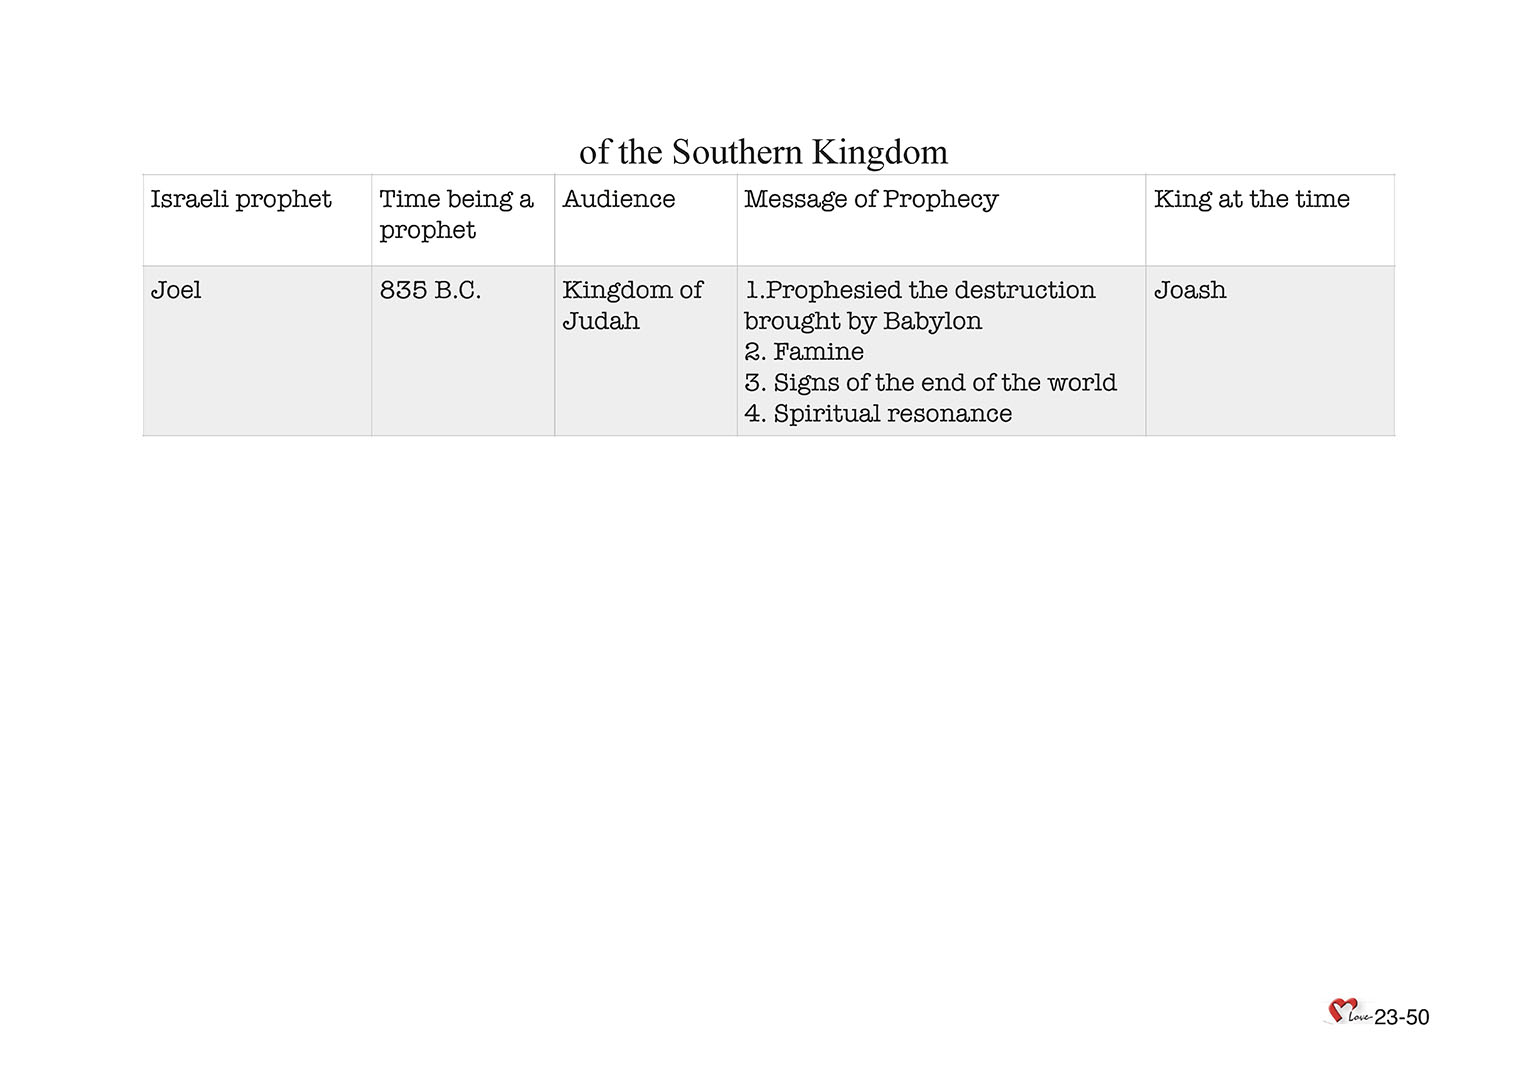 Chapter 23 - Lesson 70 - Prophets Before the Subjugation of Southern Kingdom: Joel